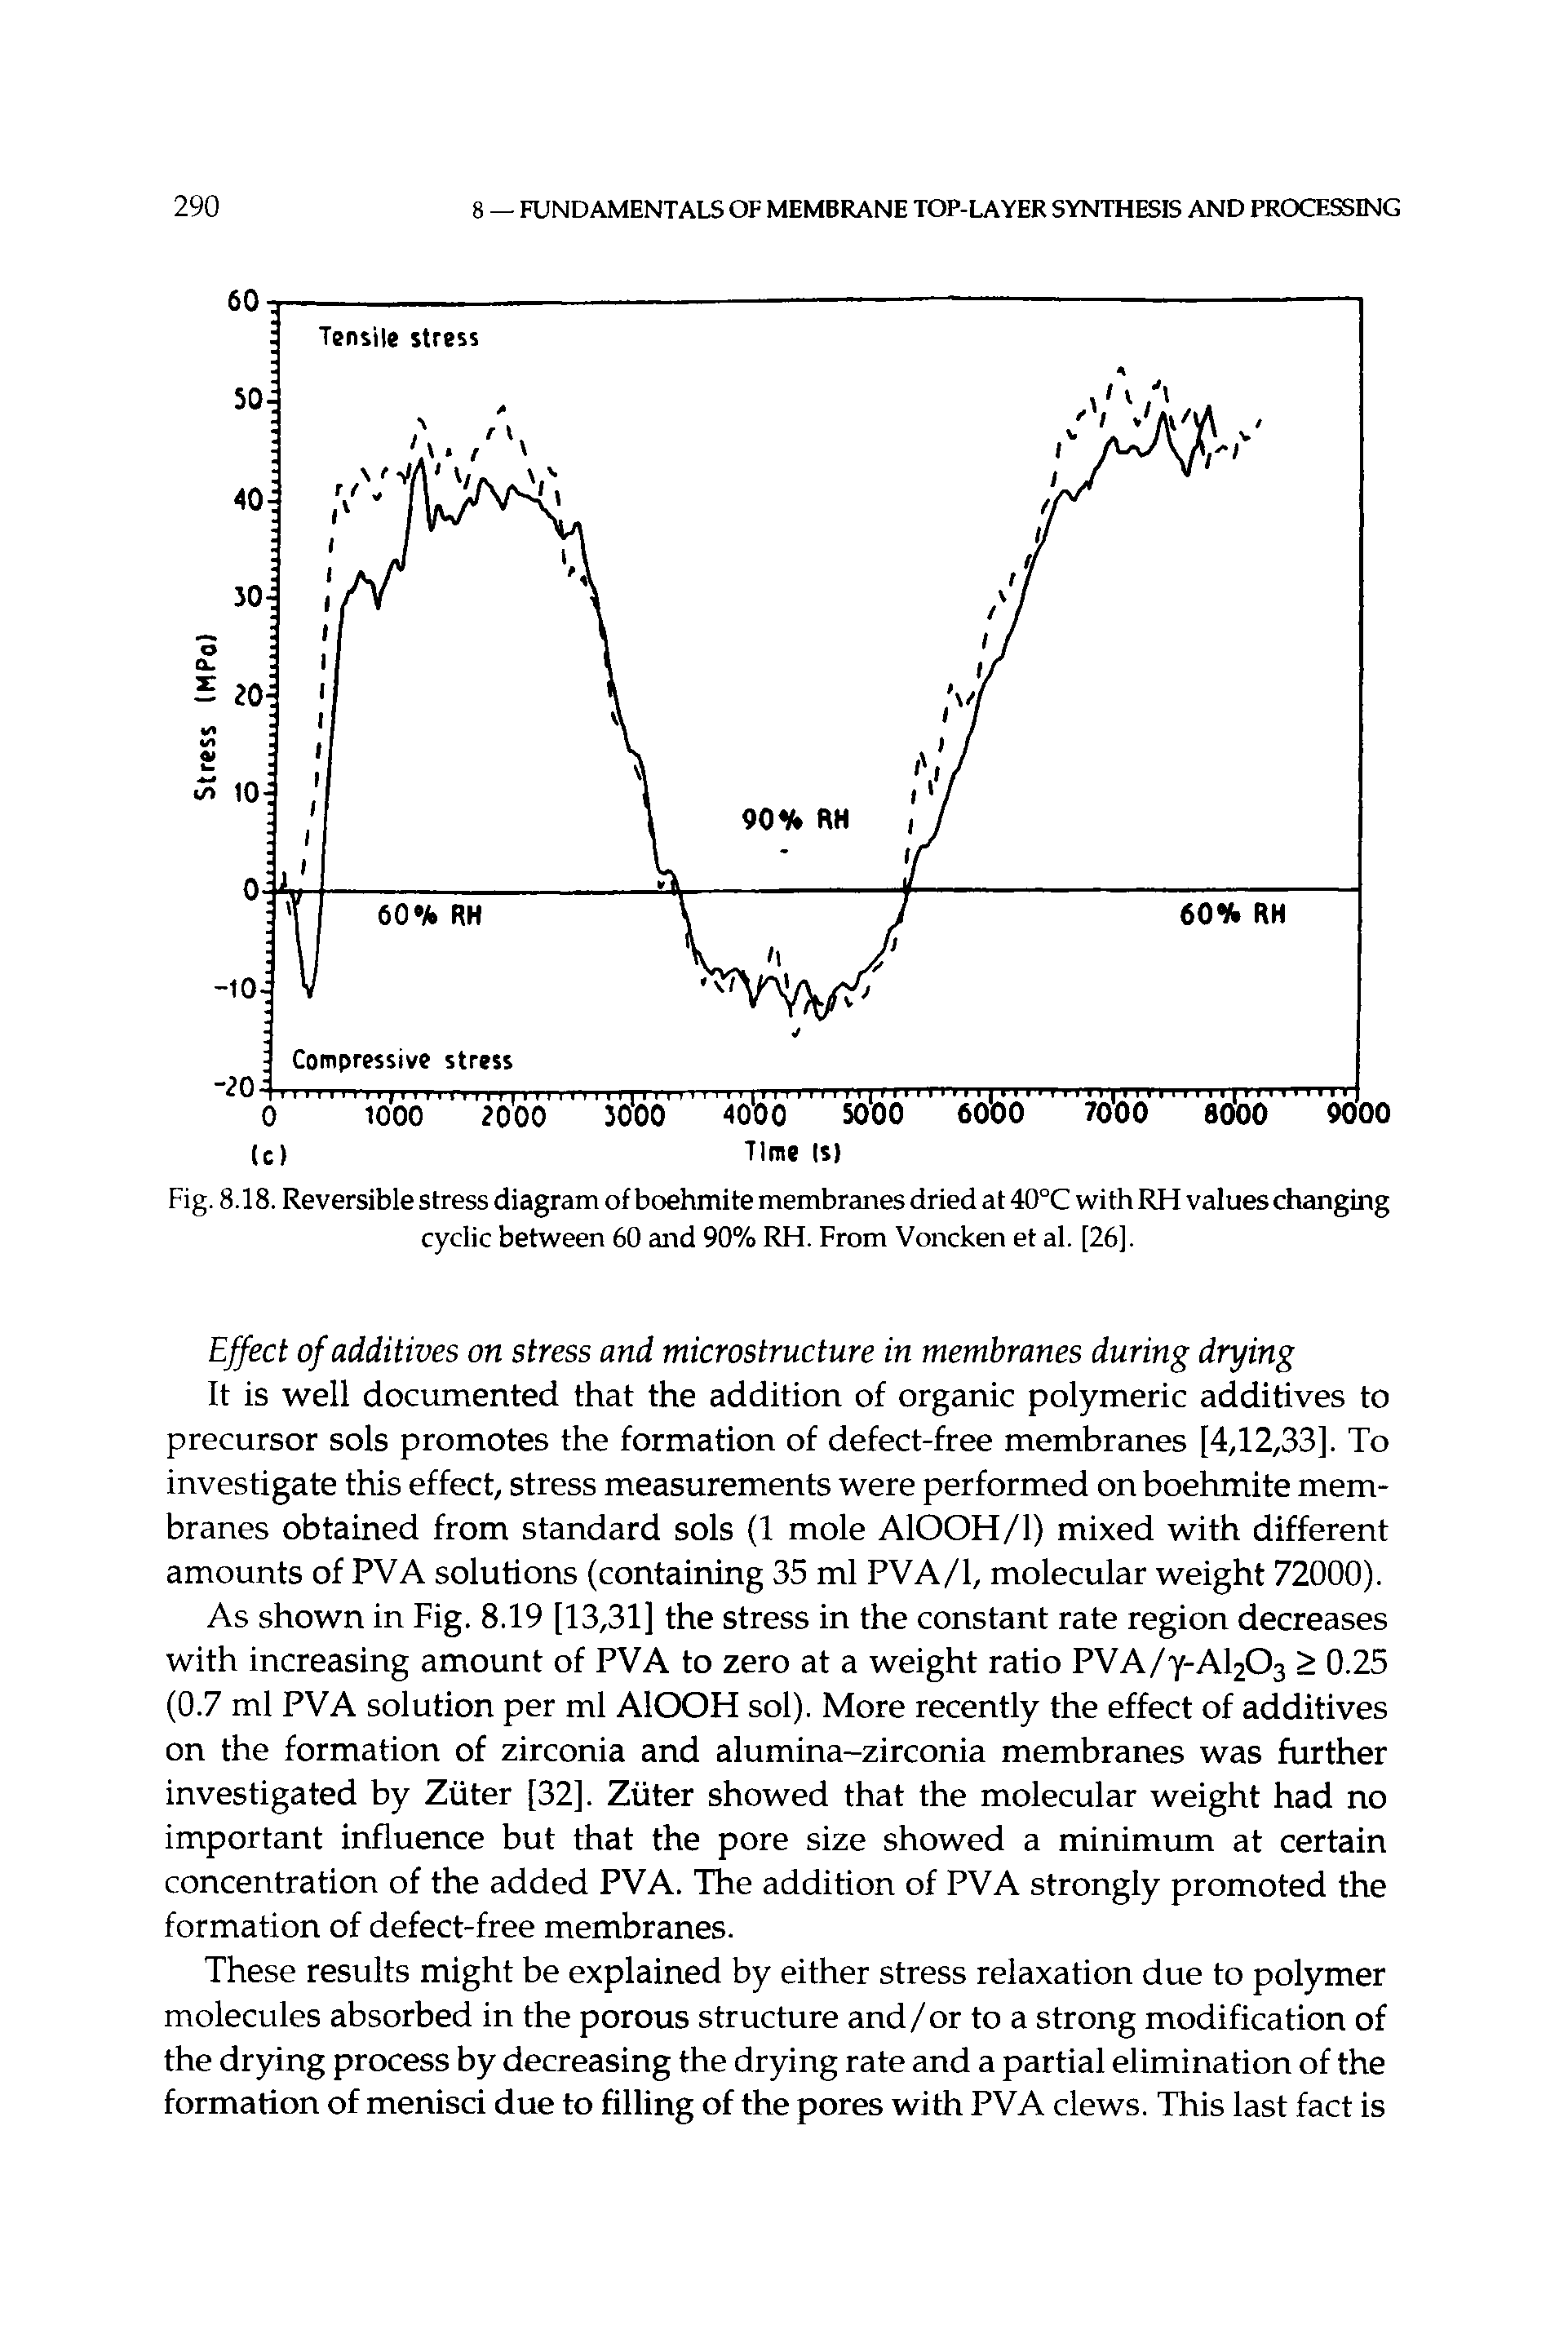 Fig. 8.18. Reversible stress diagram of boehmite membranes dried at 40°C with RH values changing cyclic between 60 and 90% RH. From Voncken et al. [26].